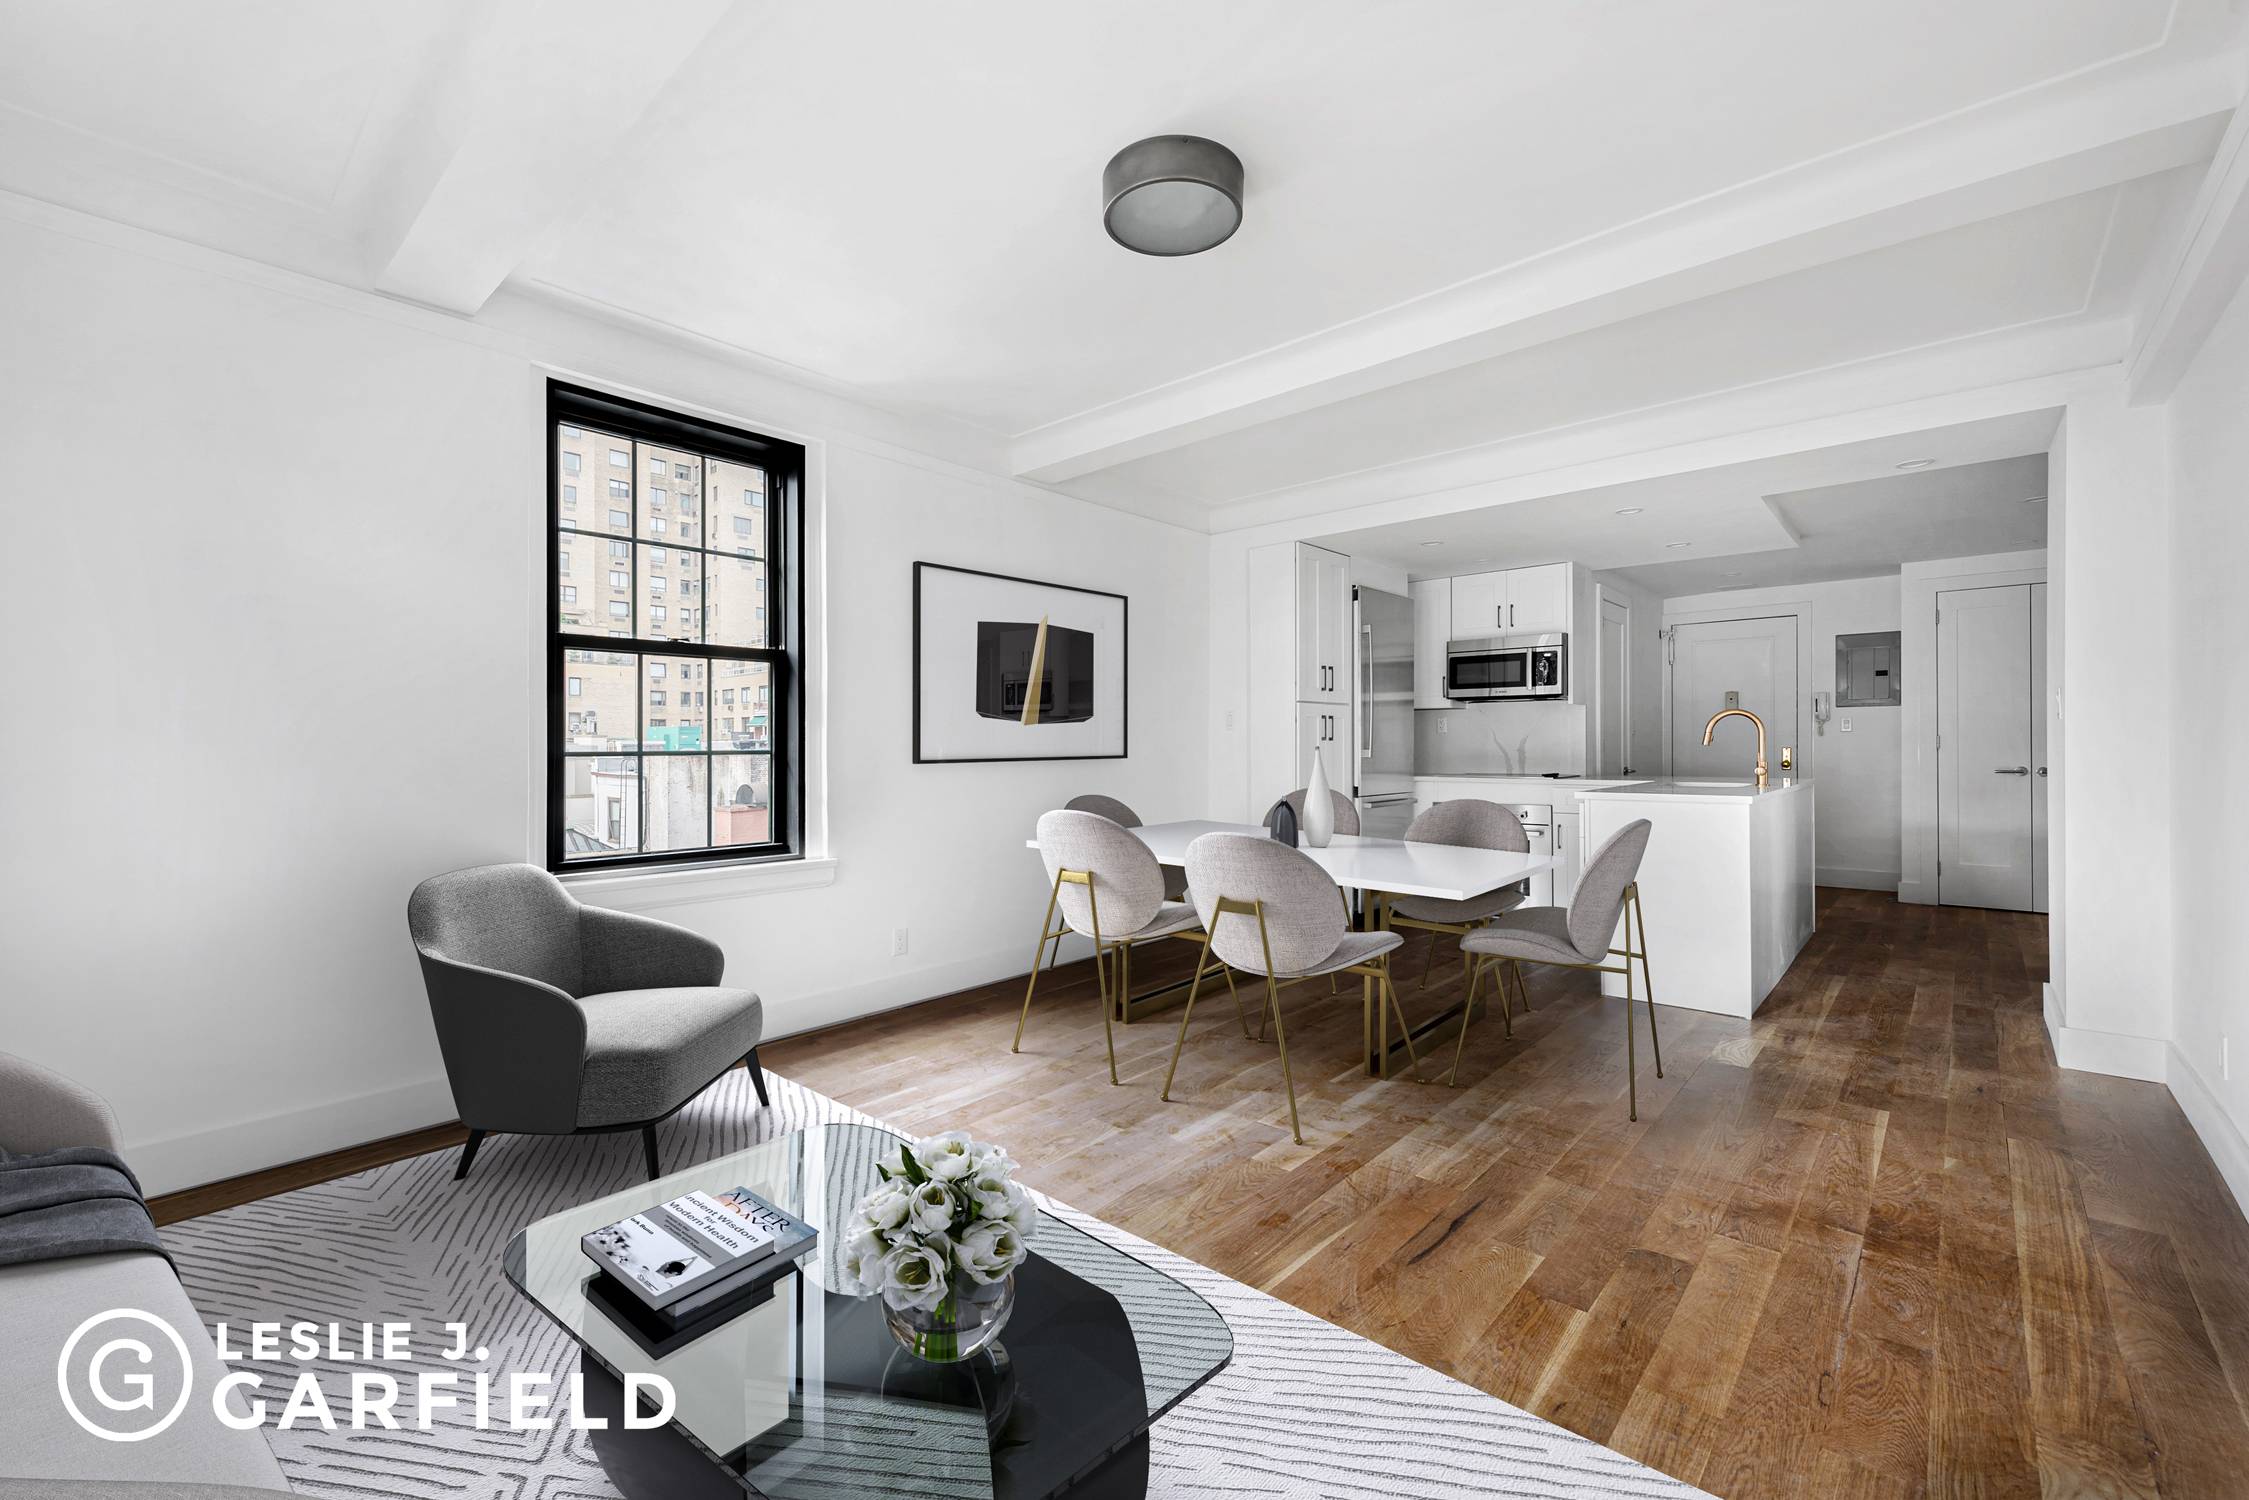 NEWLY RENOVATED two bedroom, two bathroom apartment located in a prewar, doorman building steps from Madison Avenue and Central Park.